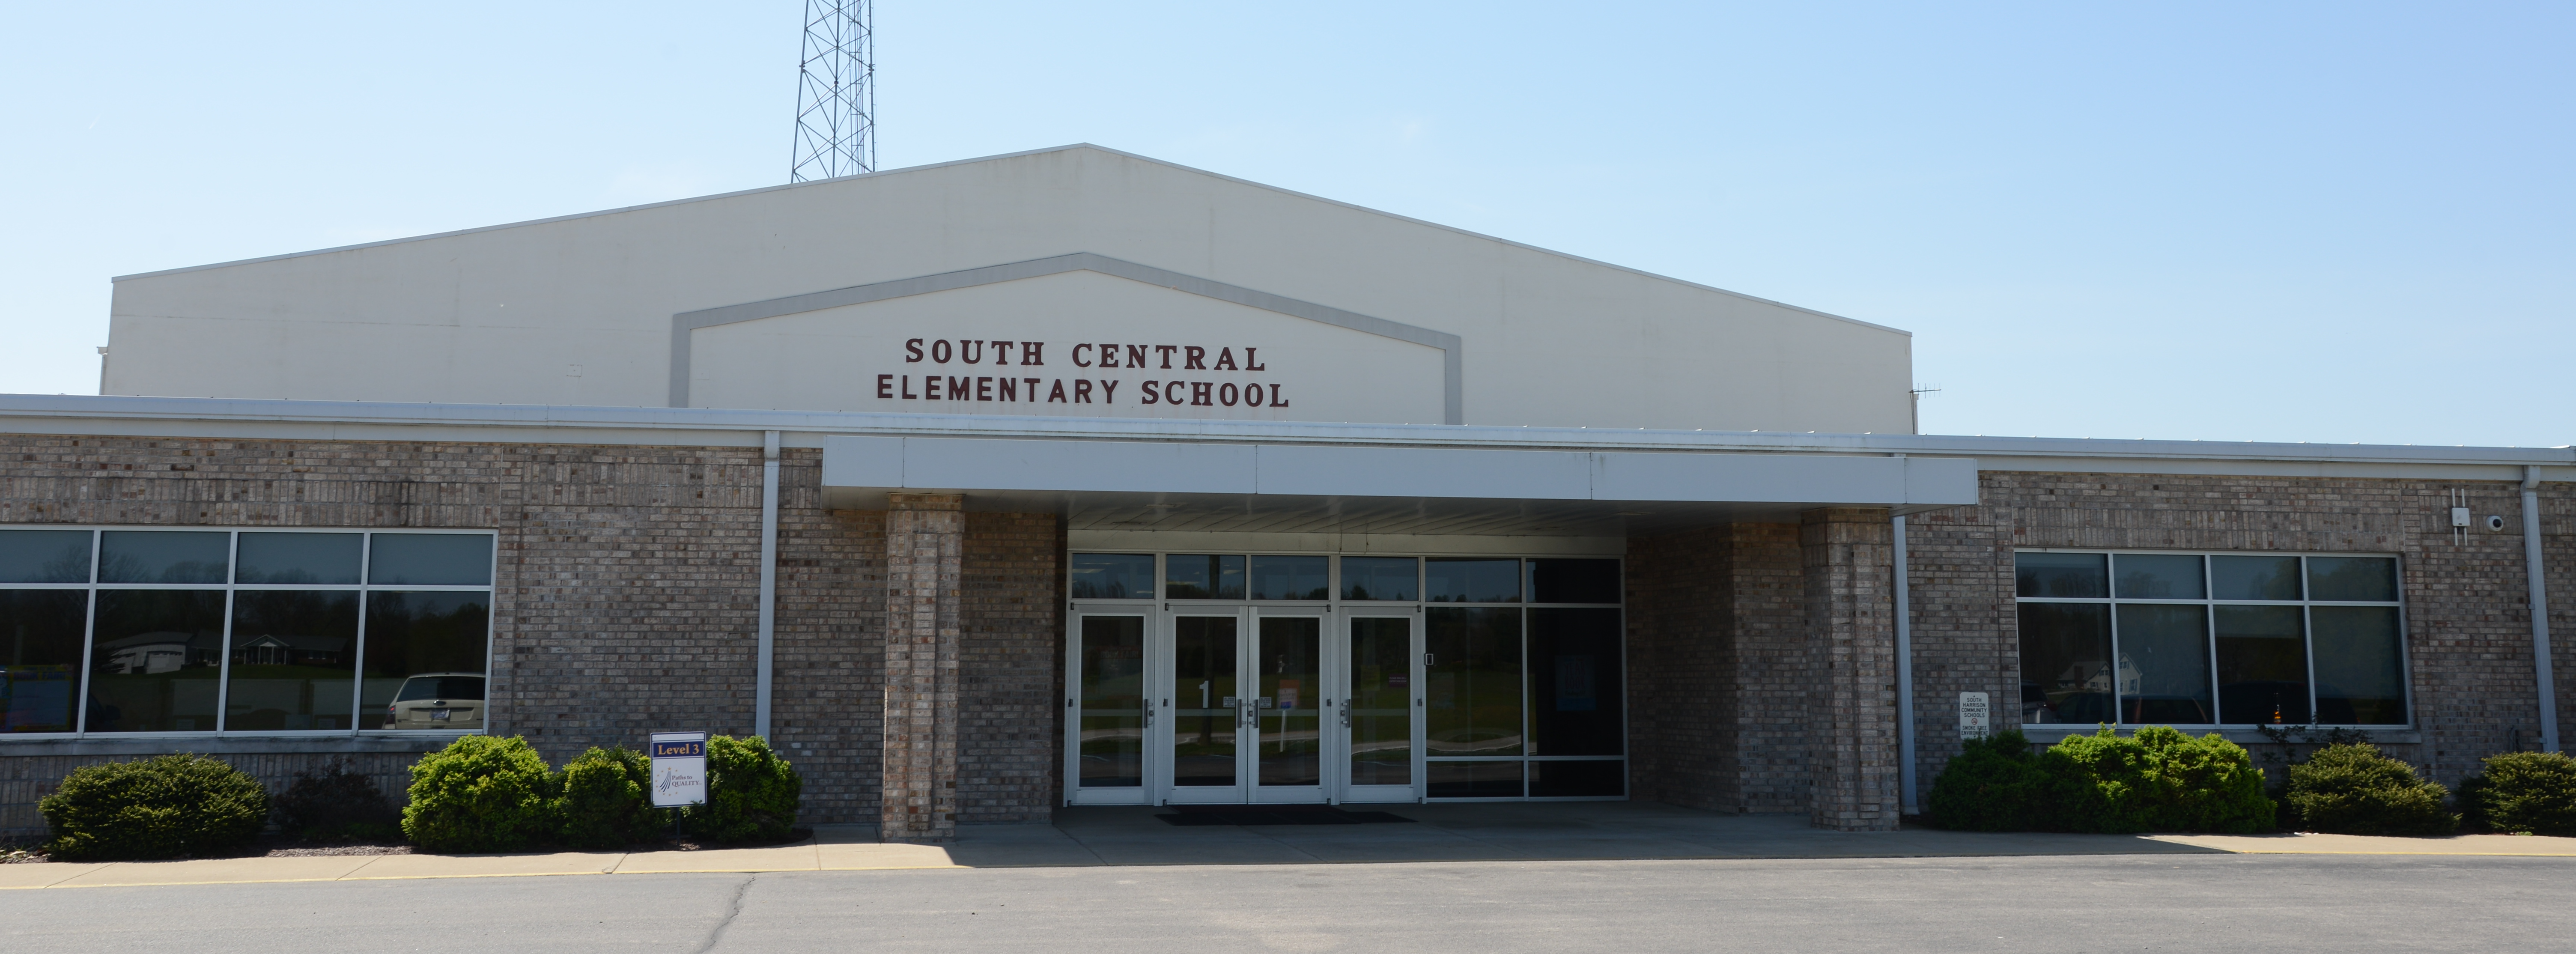 picture of the main entrance to South Central Elementary School